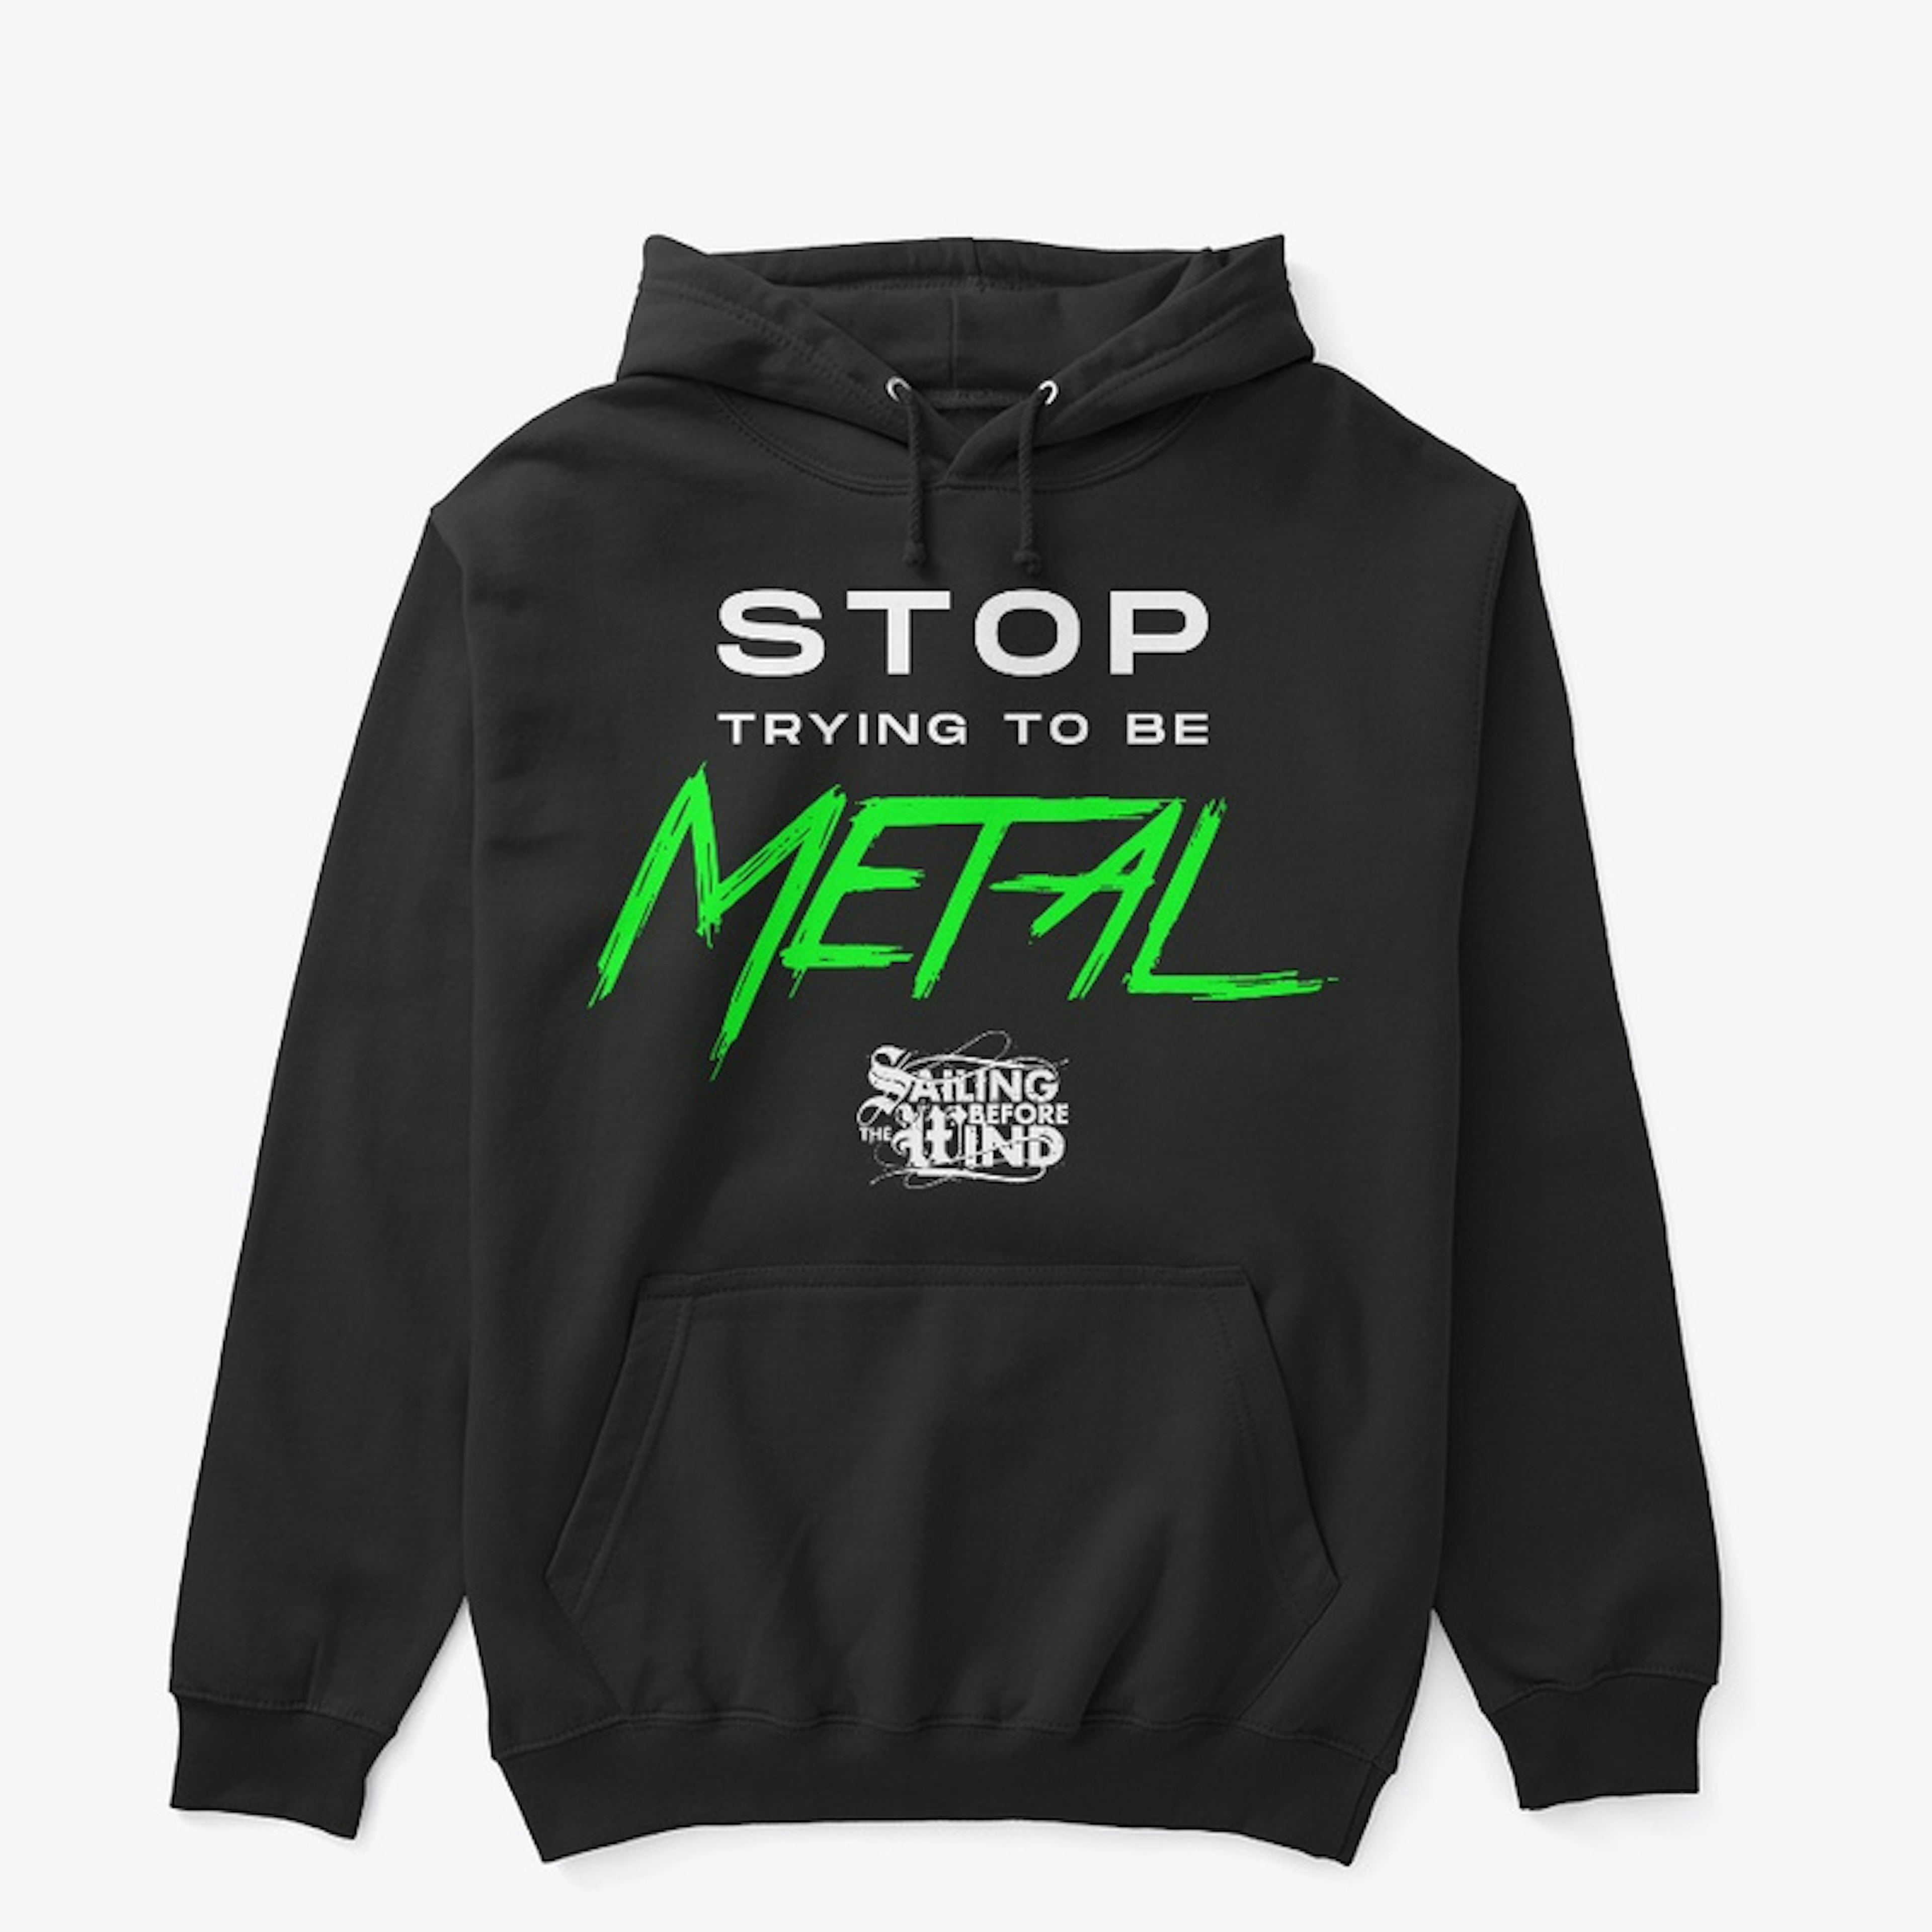 STOP trying to be Metal